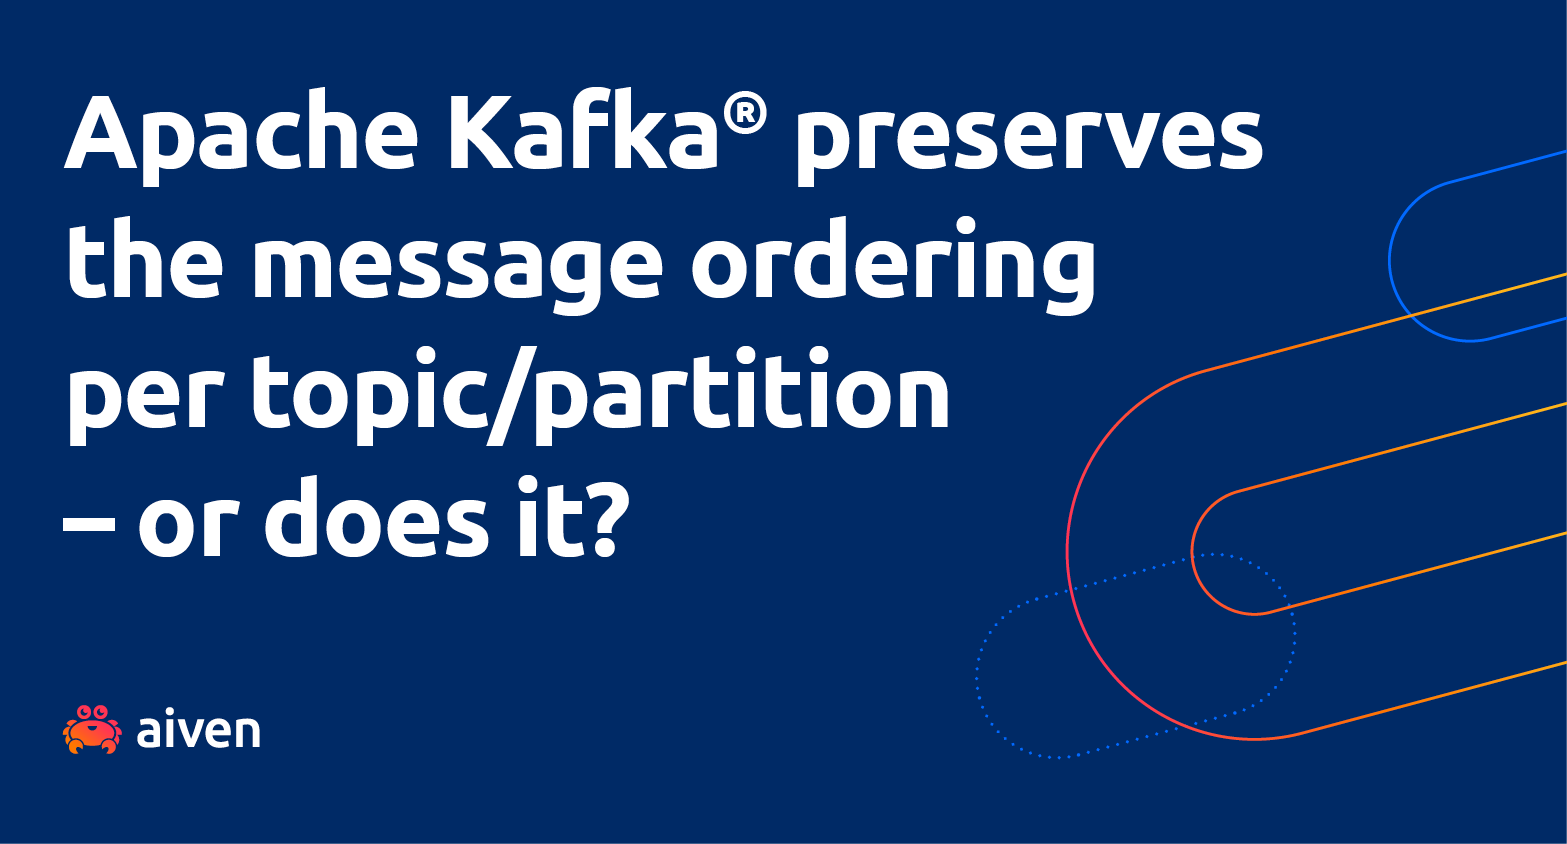 The words "Apache Kafka® preserves the message ordering per topic/partition - or does it?" against a blue background with the Aiven cuddly crab logo in the corner